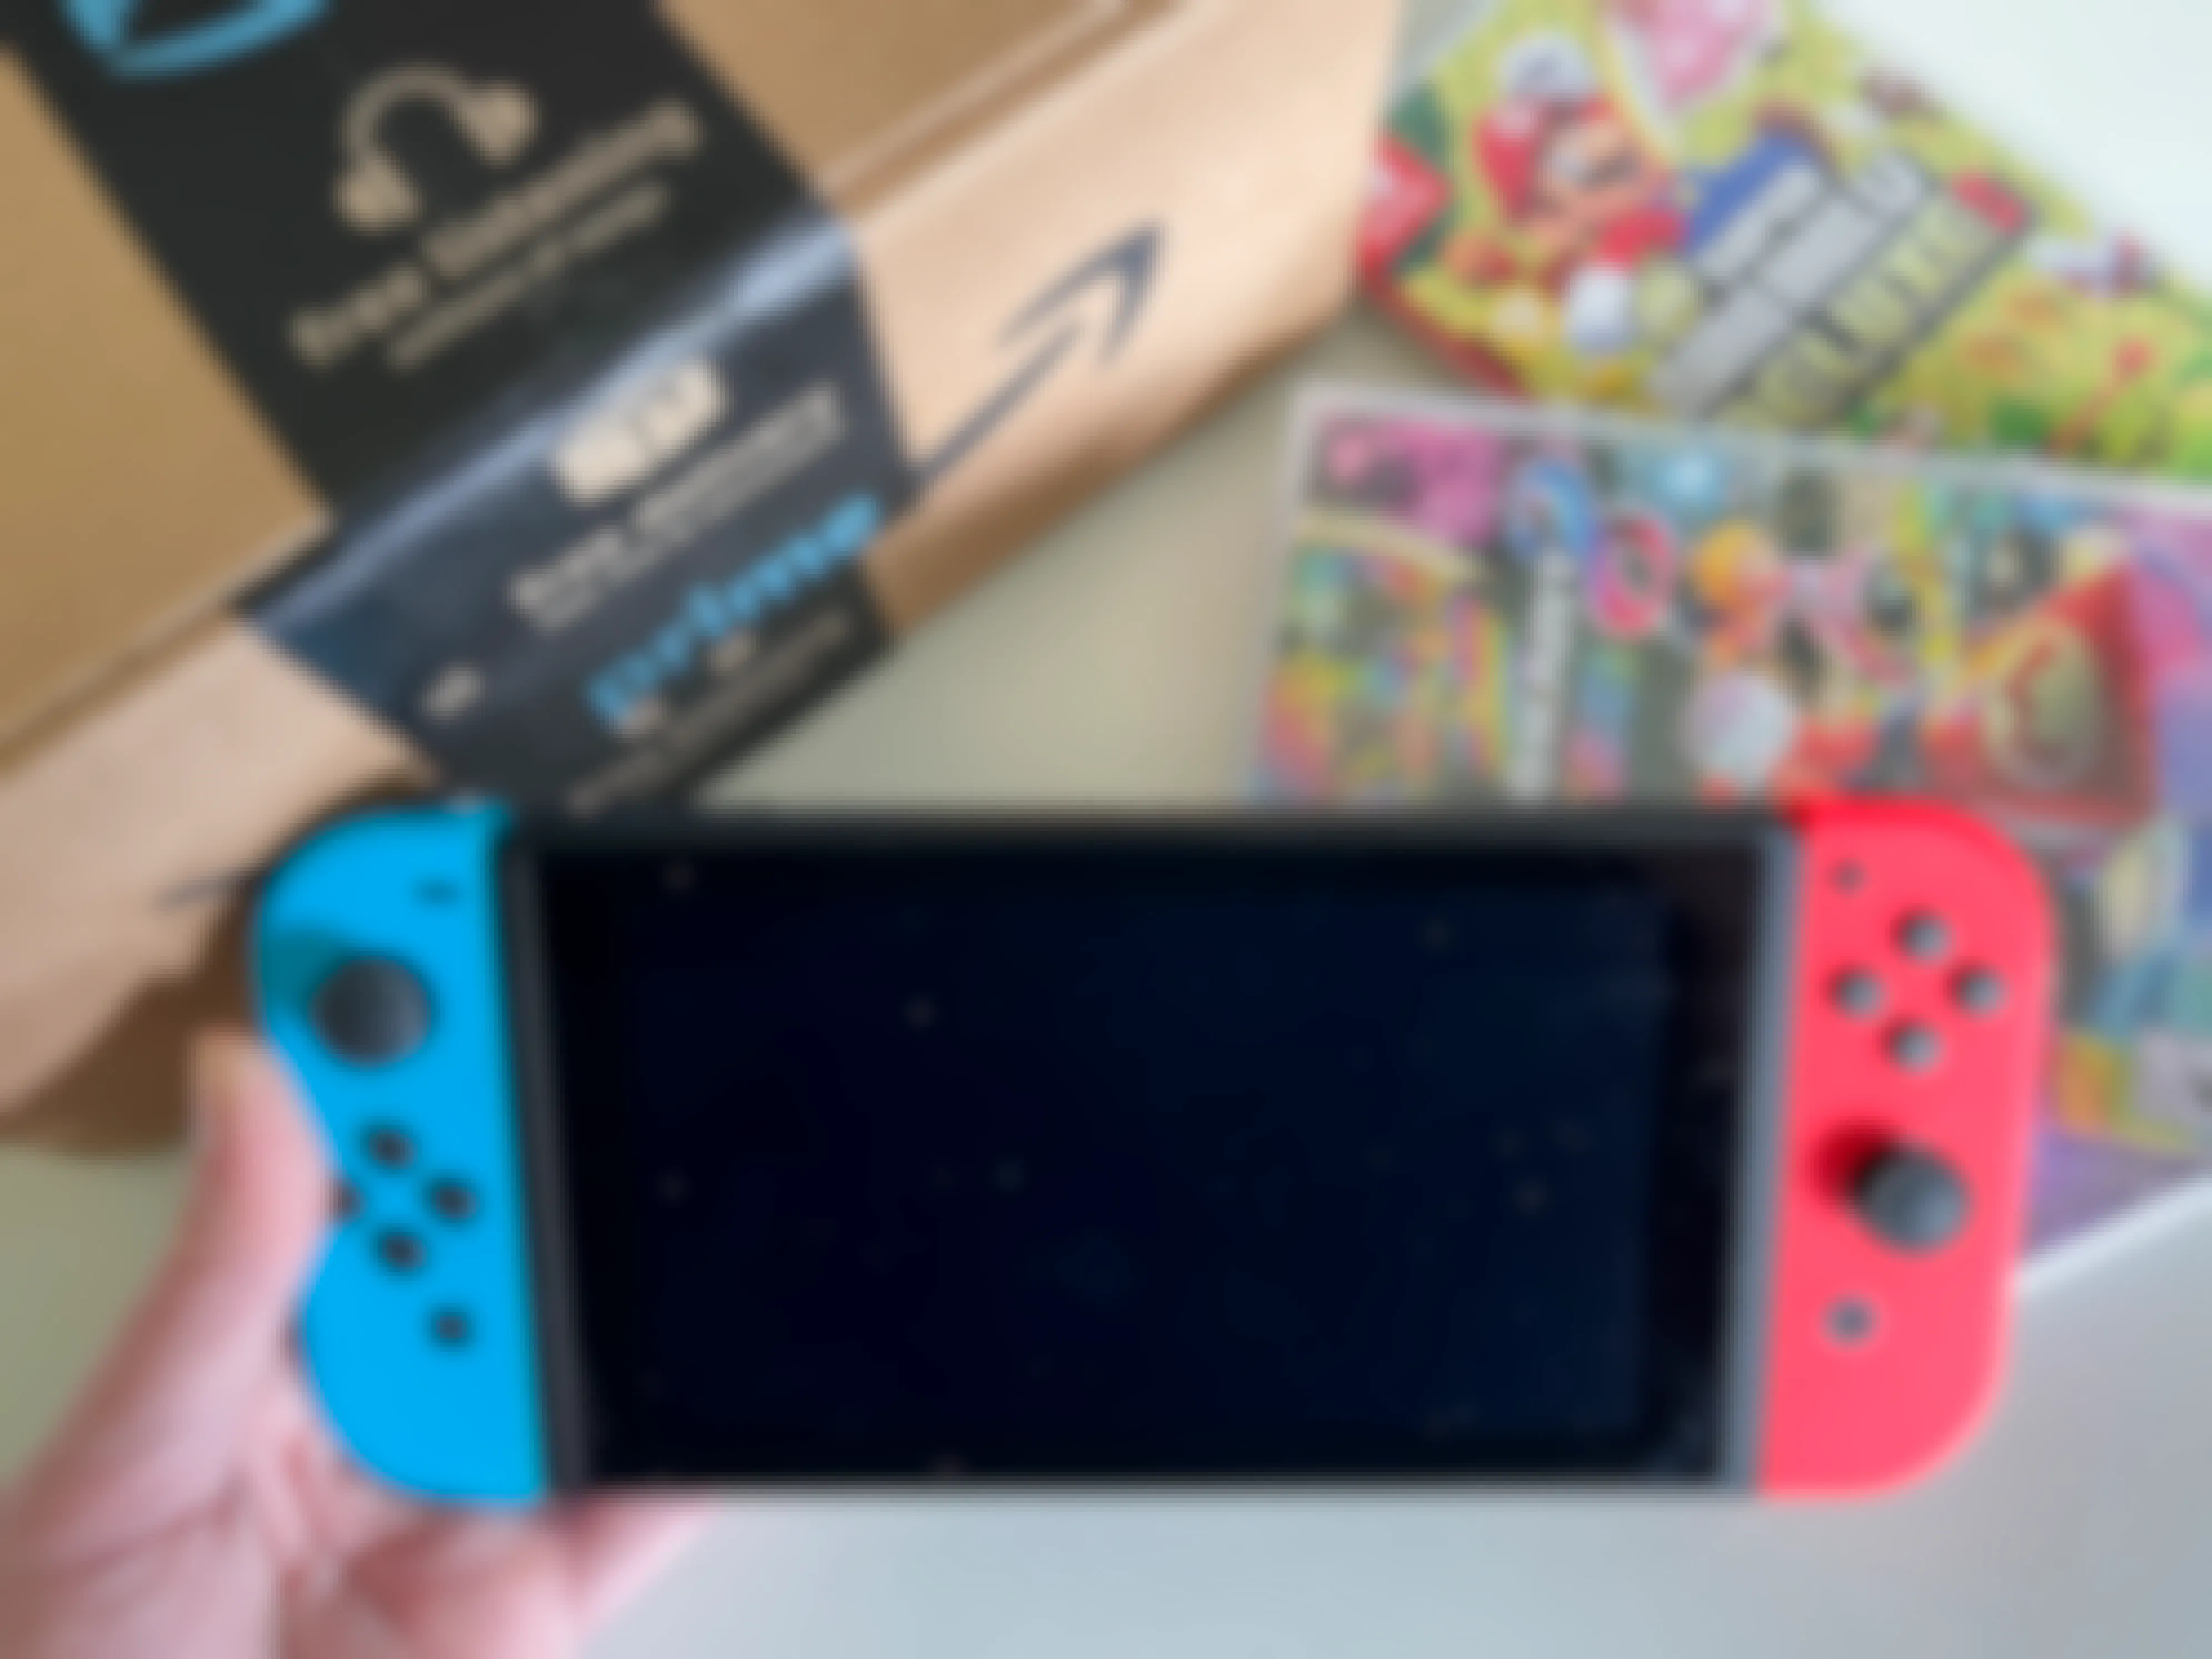 A person's hand holding a Nintendo Switch console next to an Amazon box and two Mario Switch games.